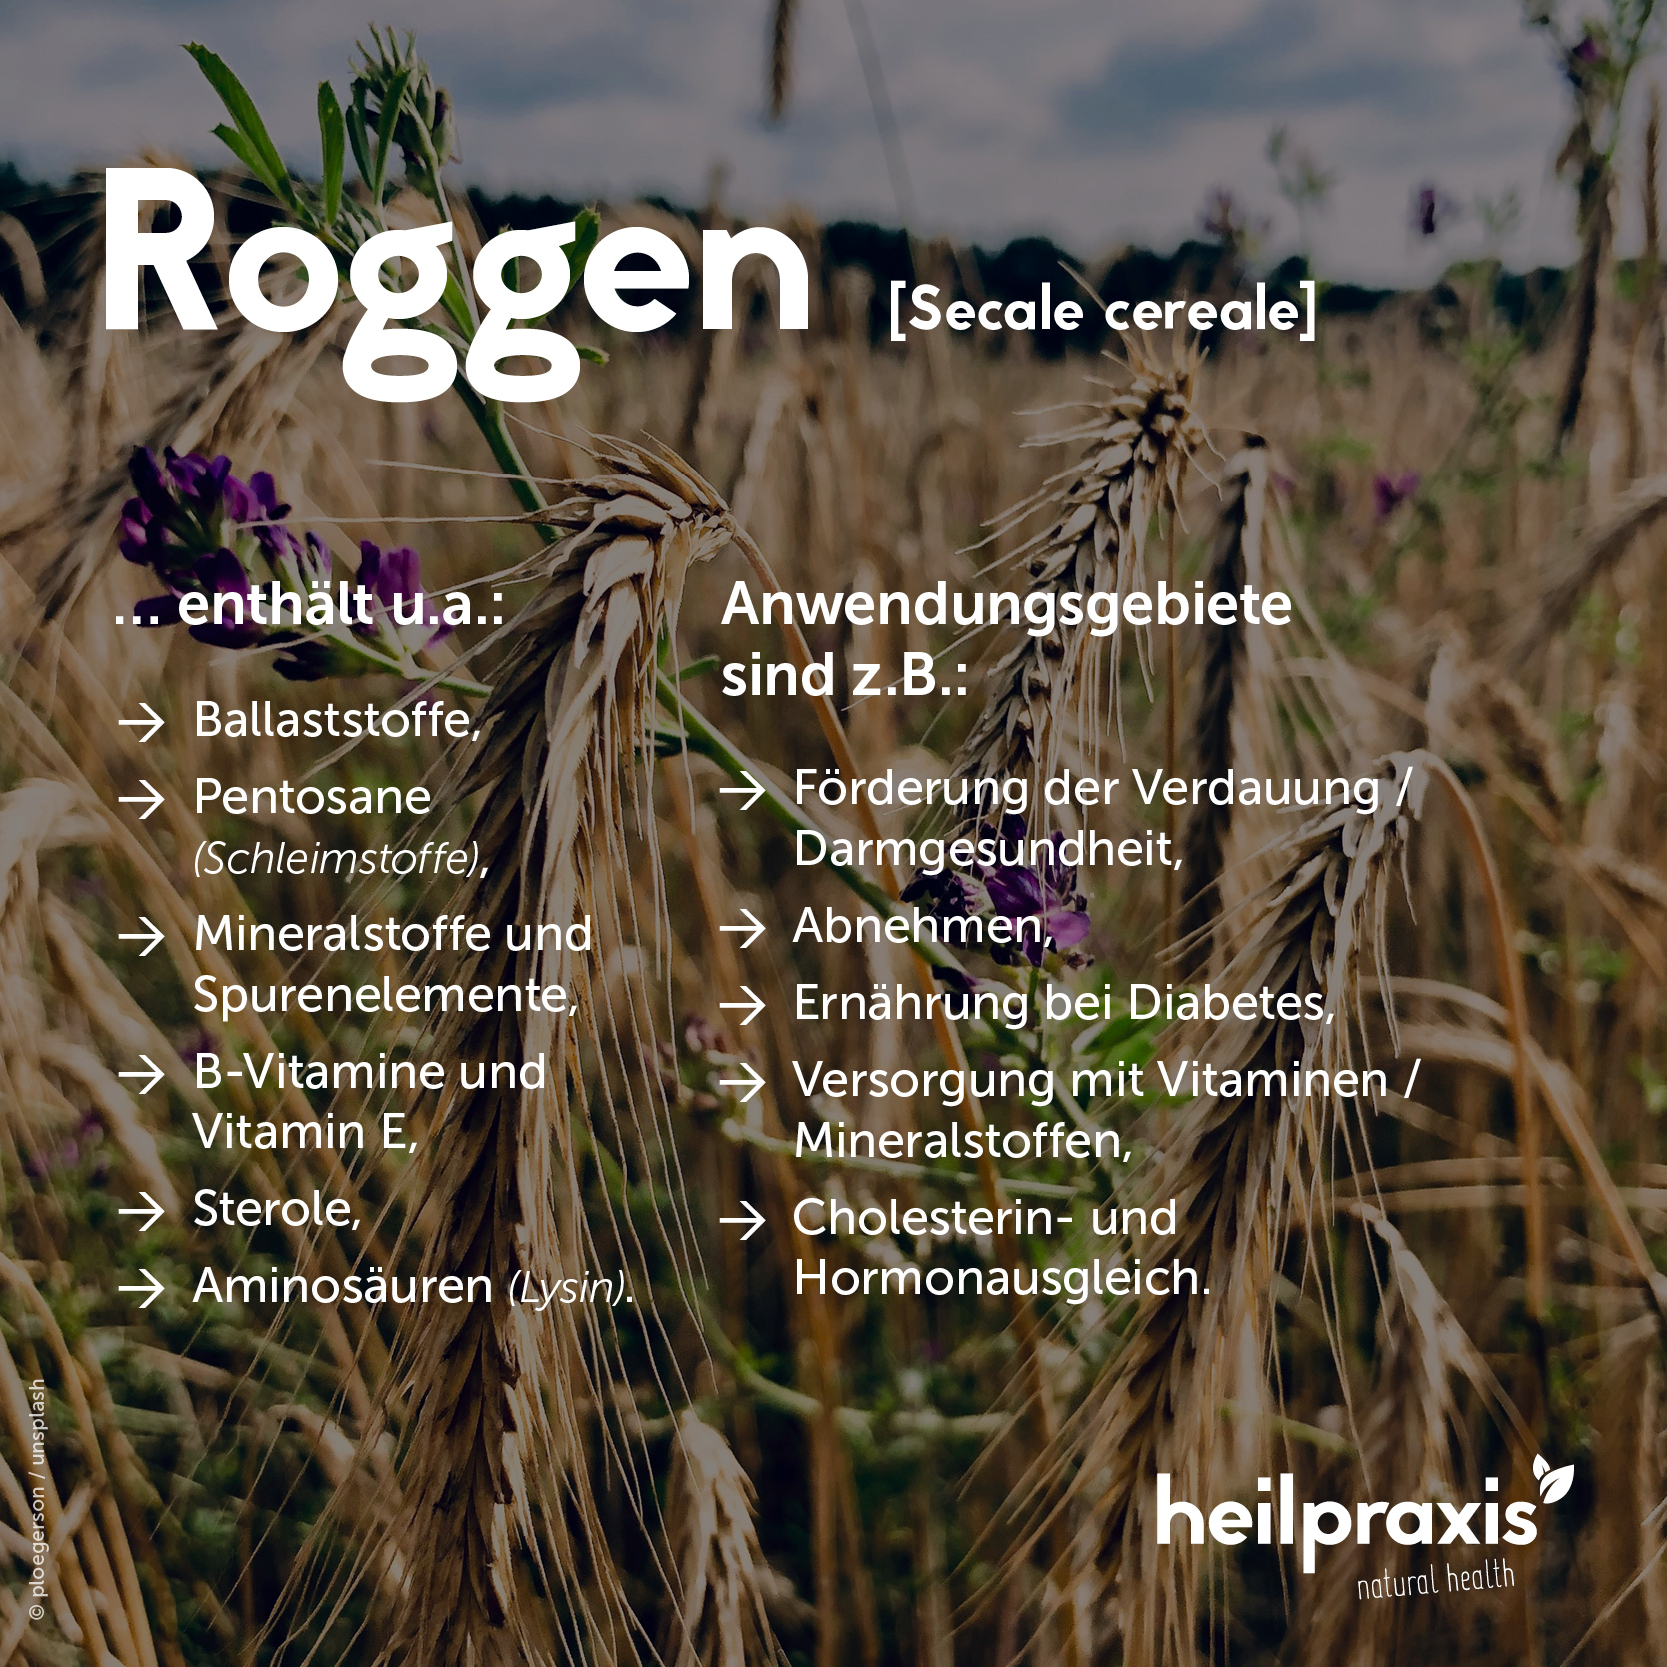 Overview graphic of the ingredients and application of rye